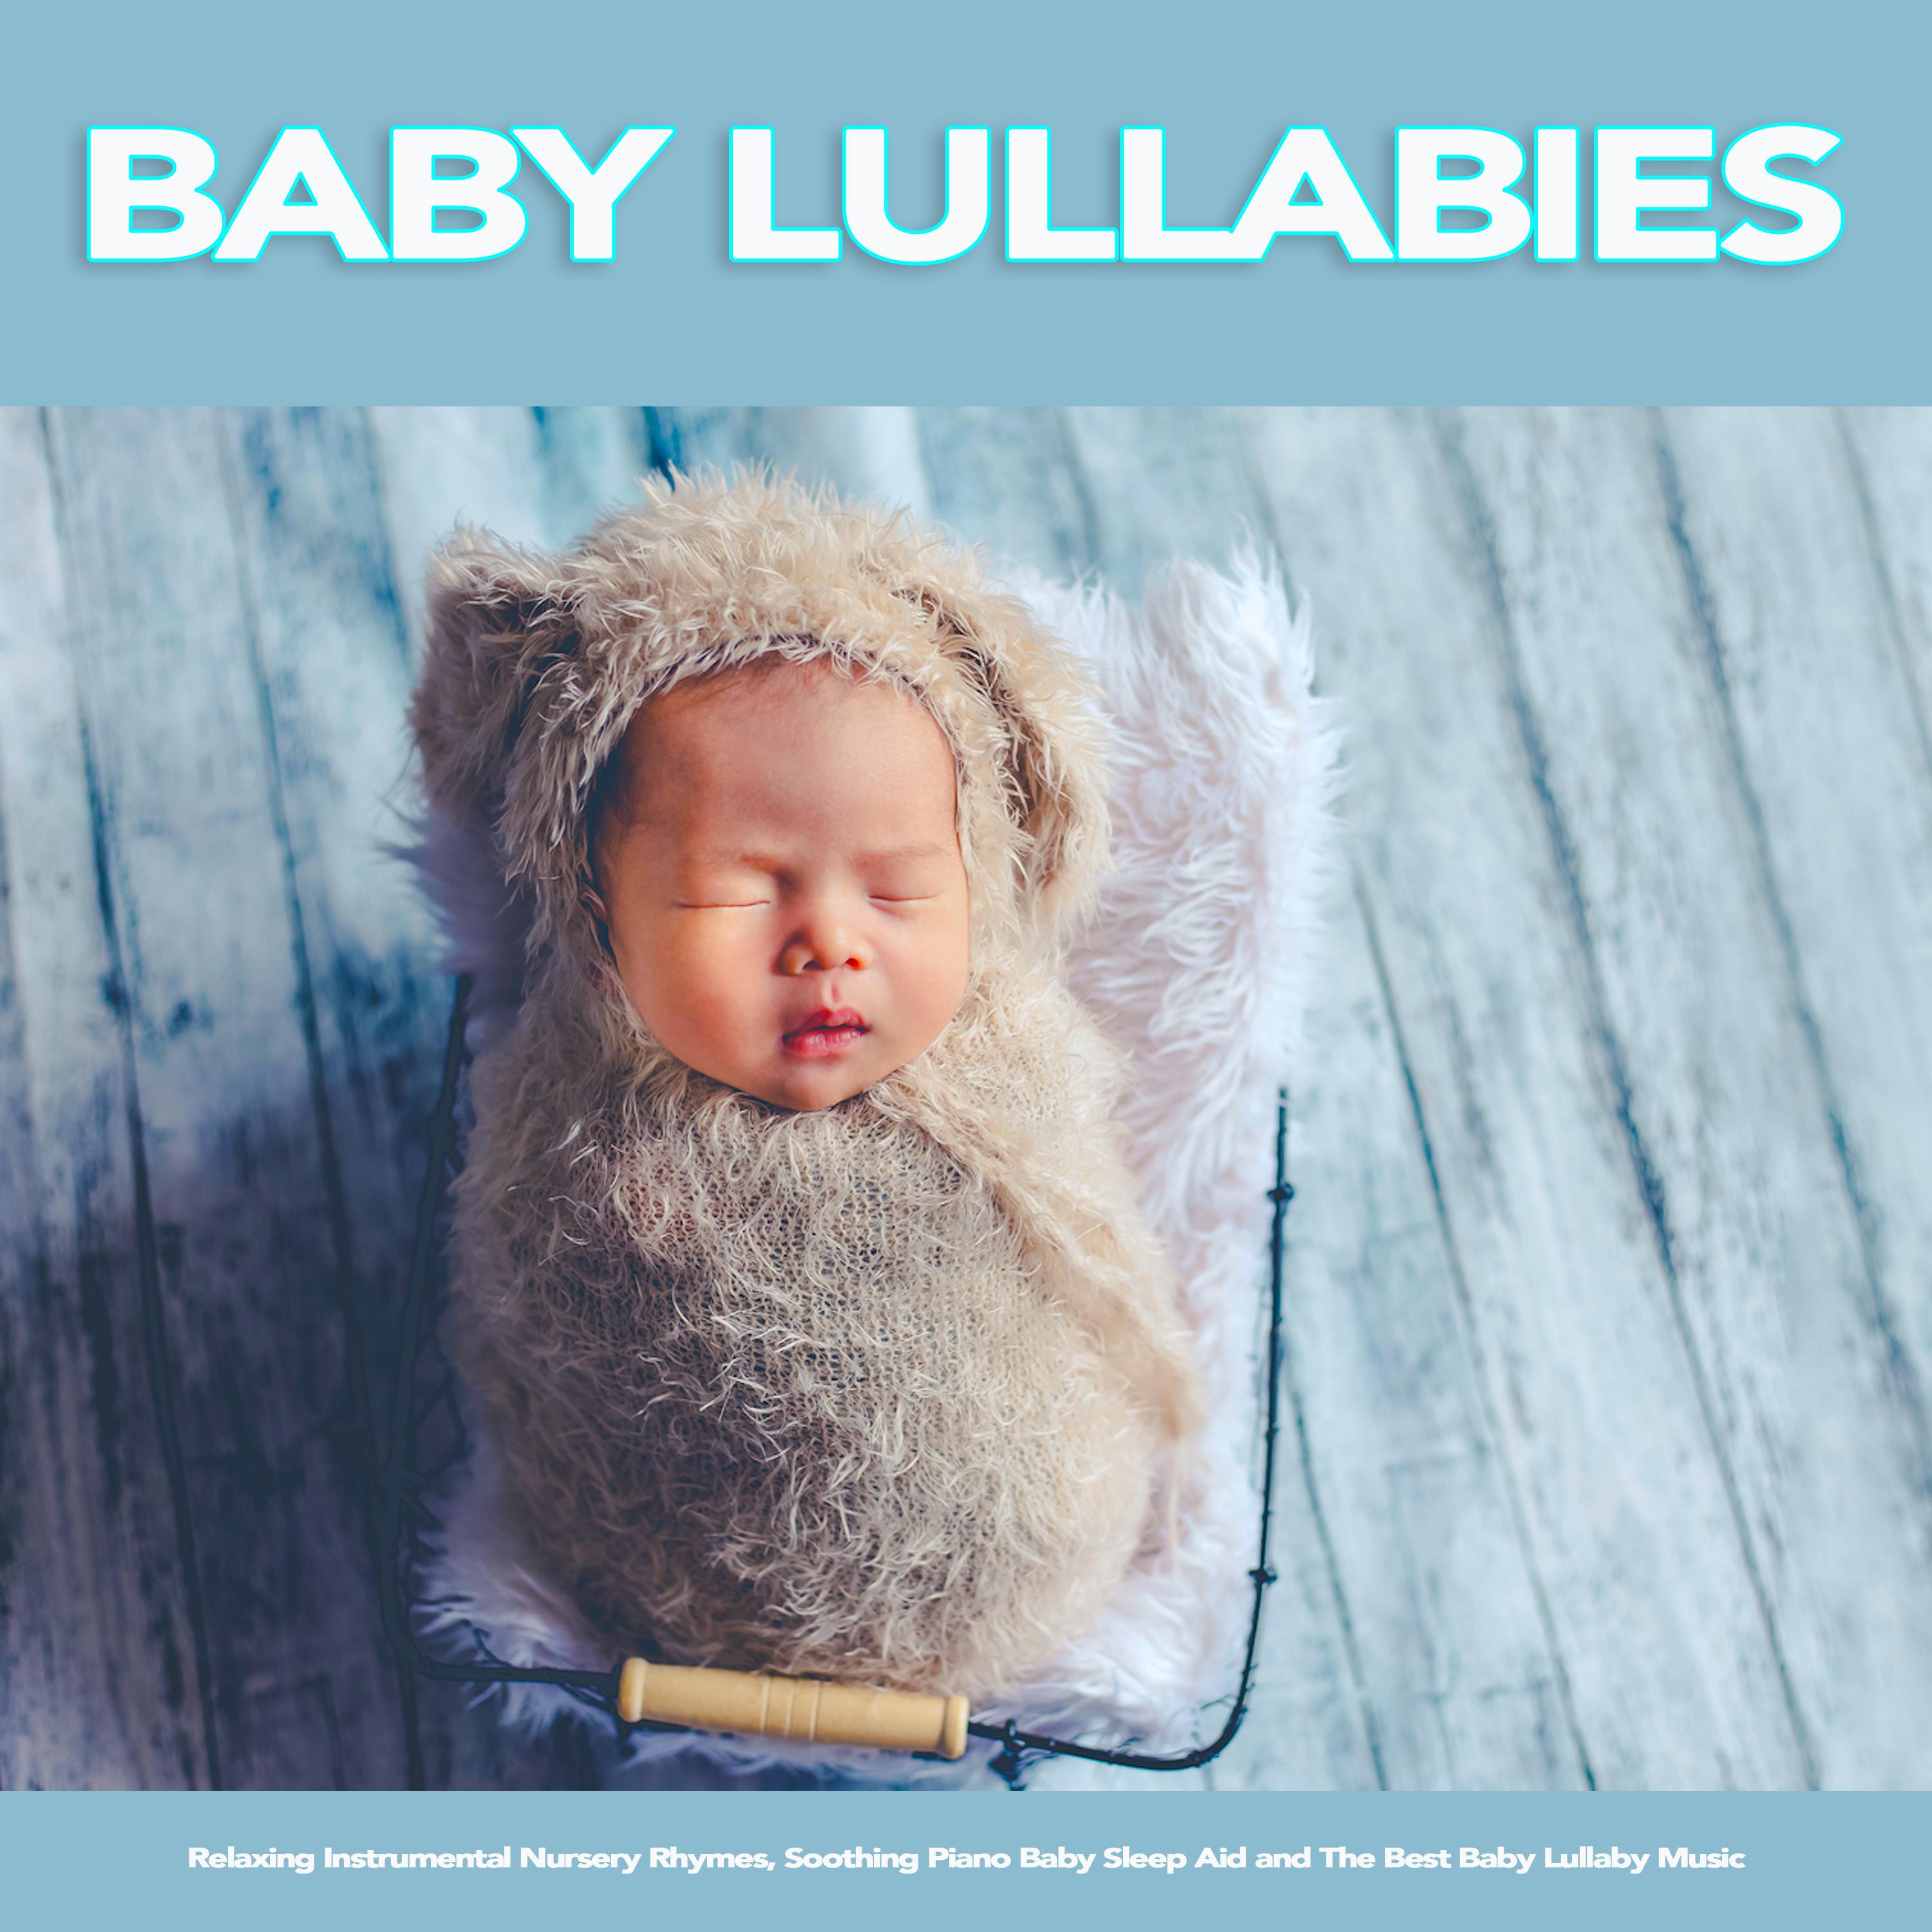 Frere Jacques - Baby Lullabies and Nursery Rhymes For Baby Sleep